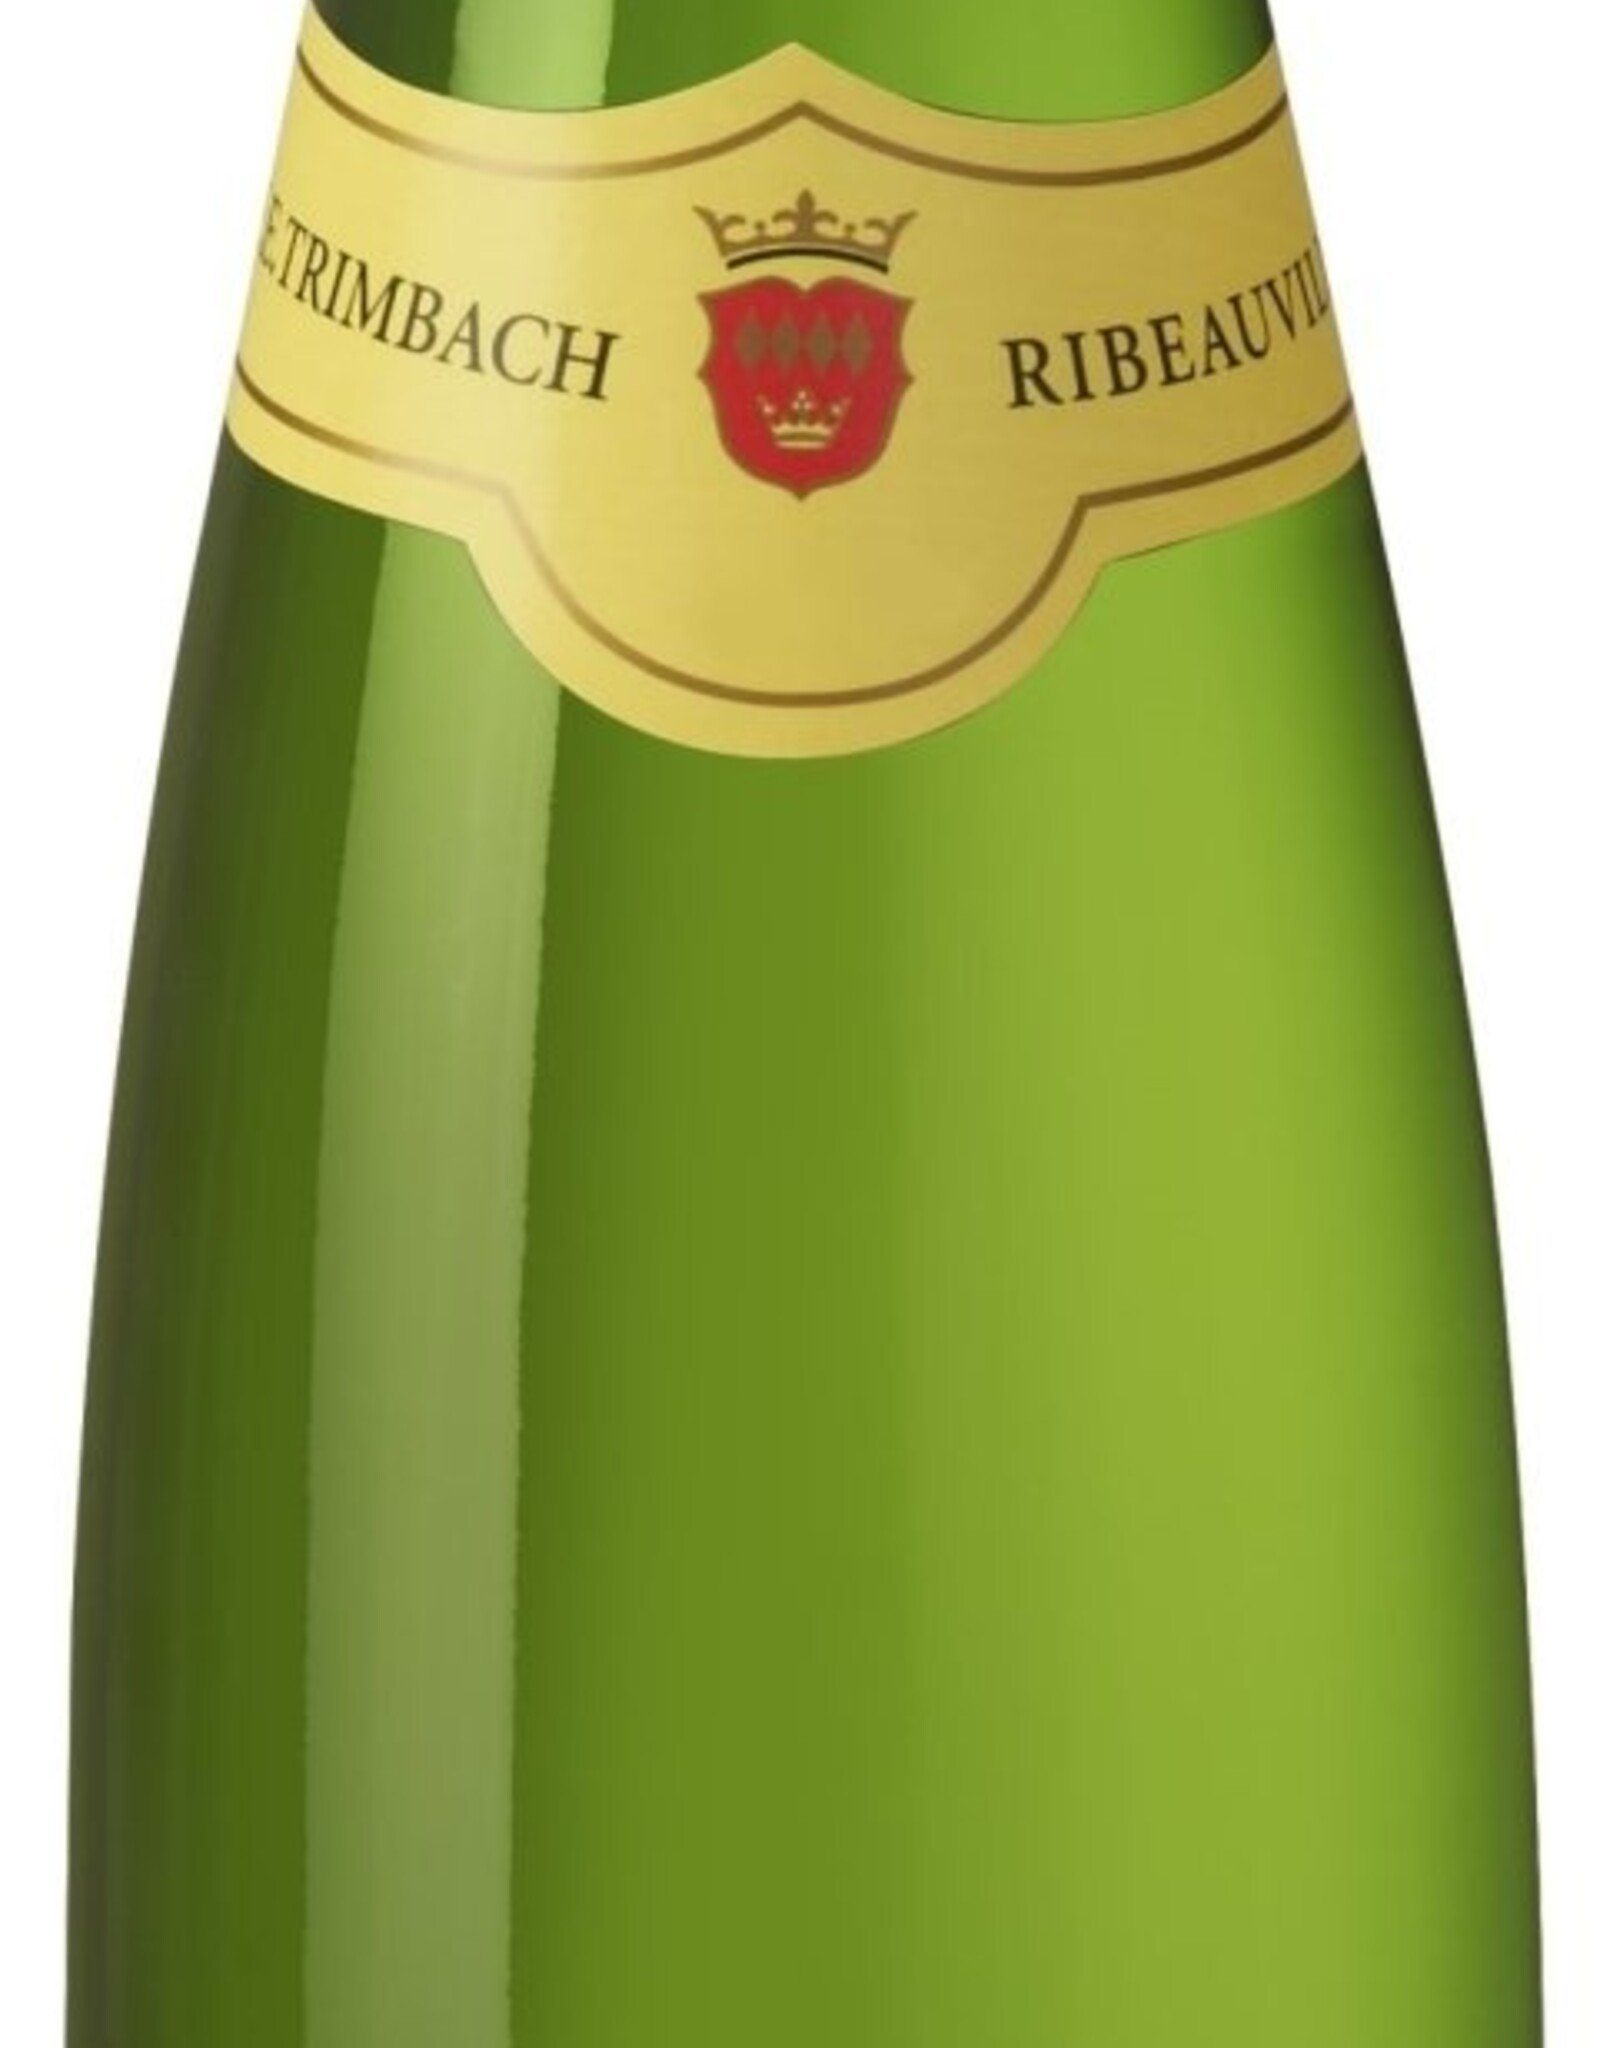 Trimbach Trimbach Riesling, Alsace 2018